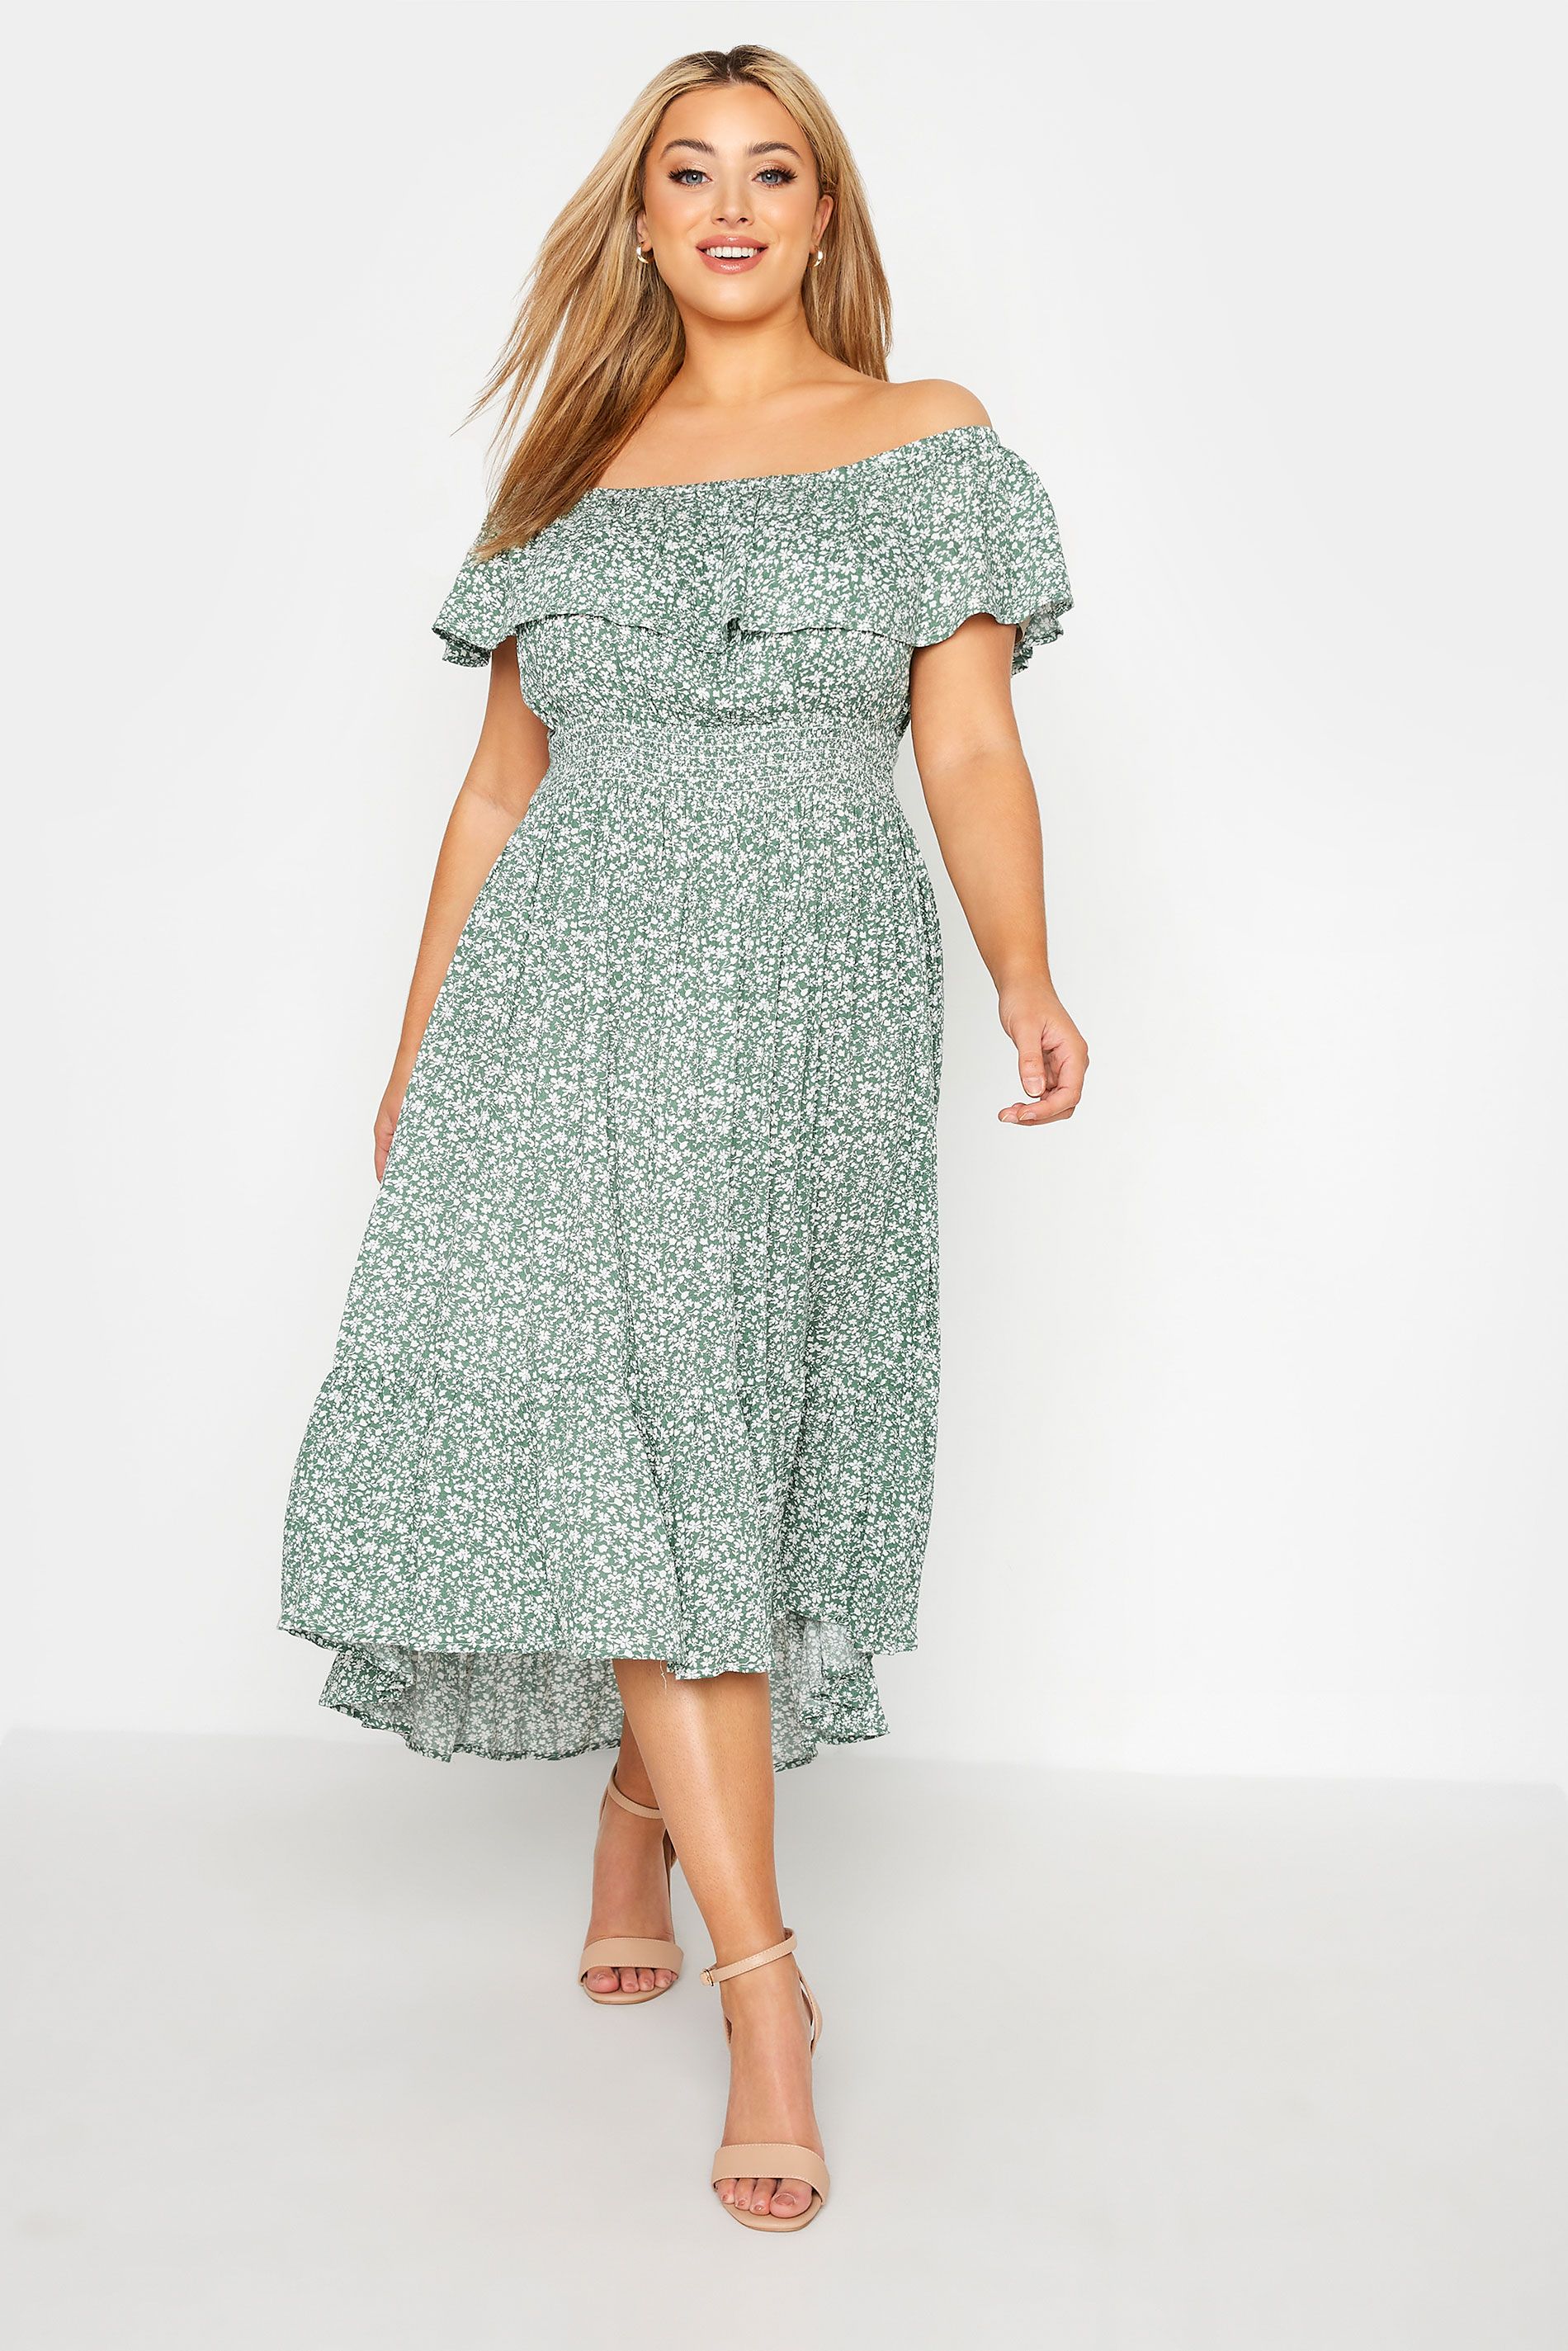 YOURS LONDON Plus Size Green Ditsy Floral Bardot Dress | Yours Clothing UK